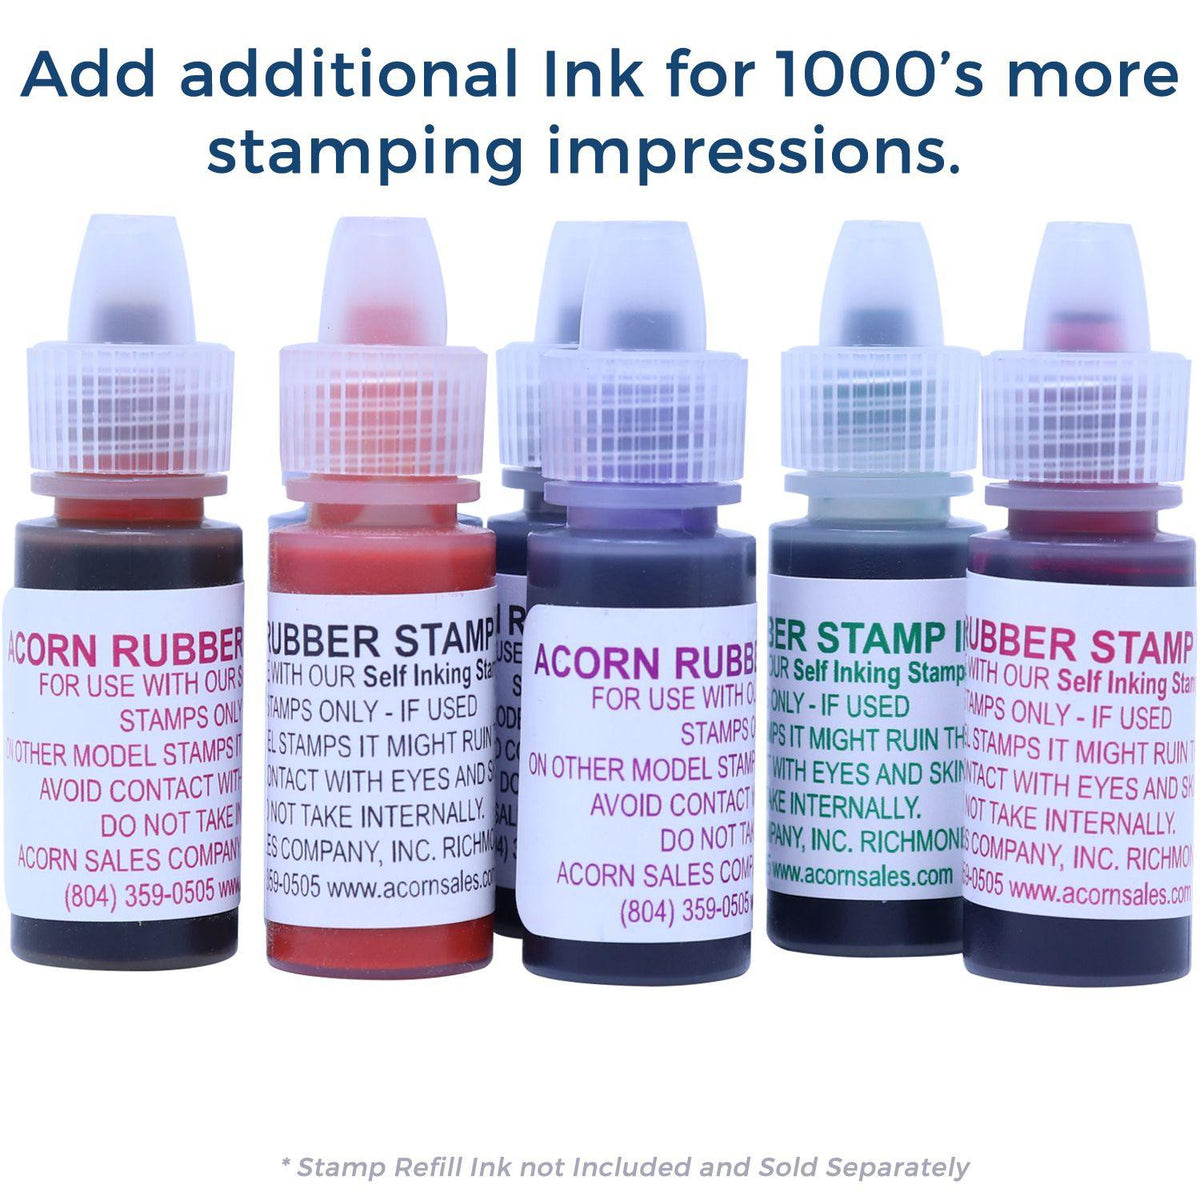 Refill Inks for Large Pre-Inked Terrific Effort Stamp Available